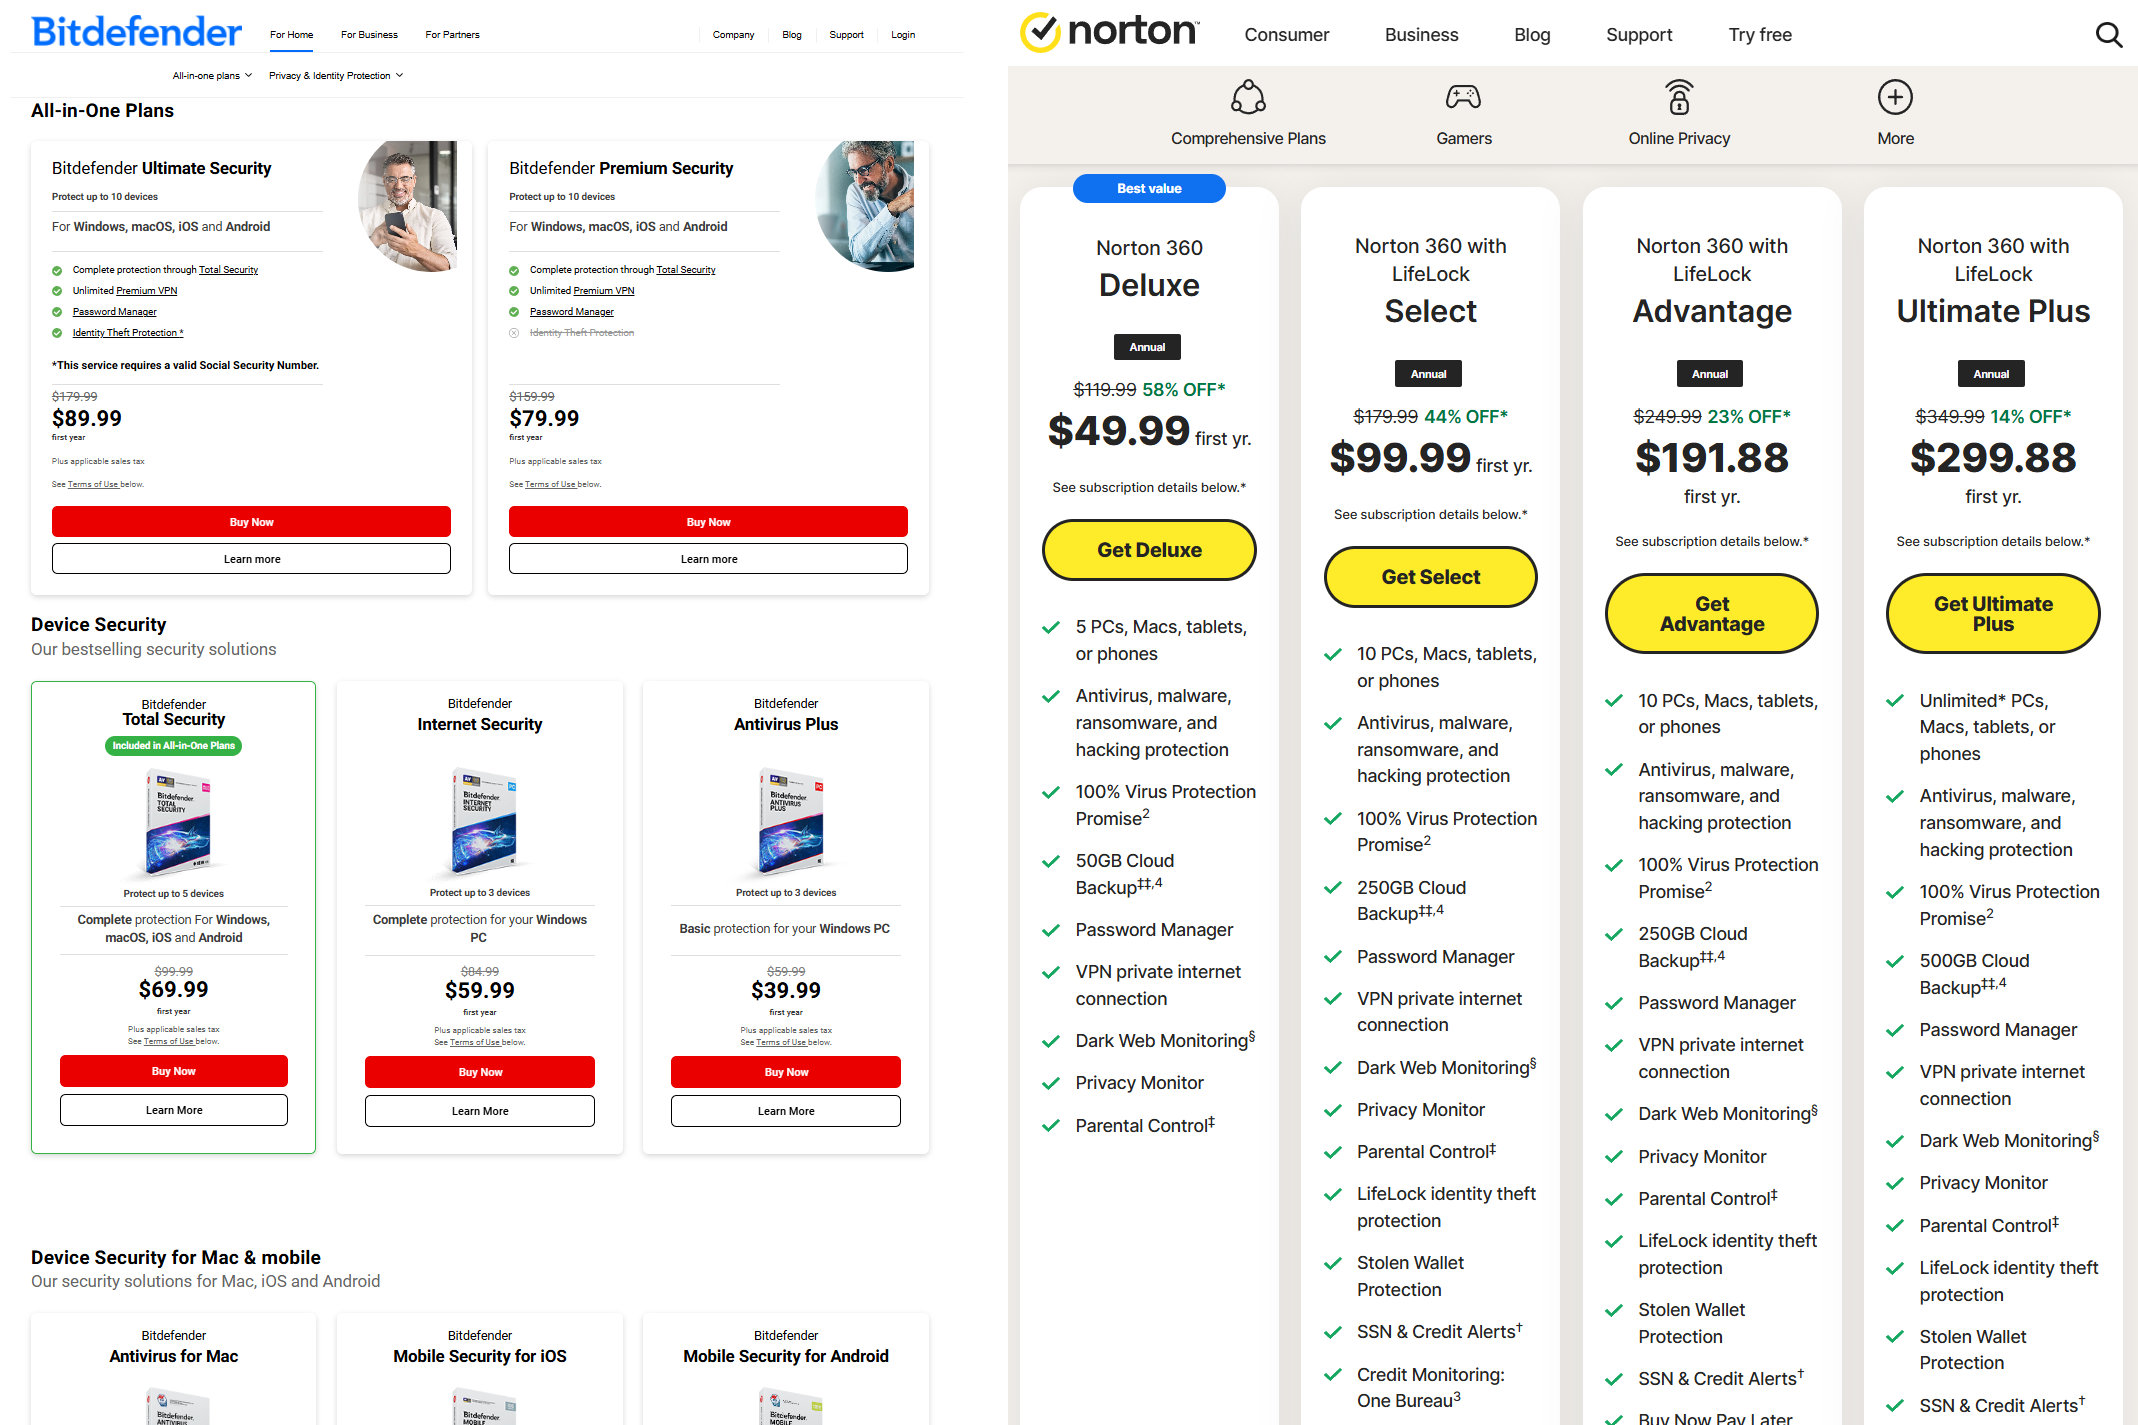 Bitdefender and Norton antivirus price lists appear side-by-side.